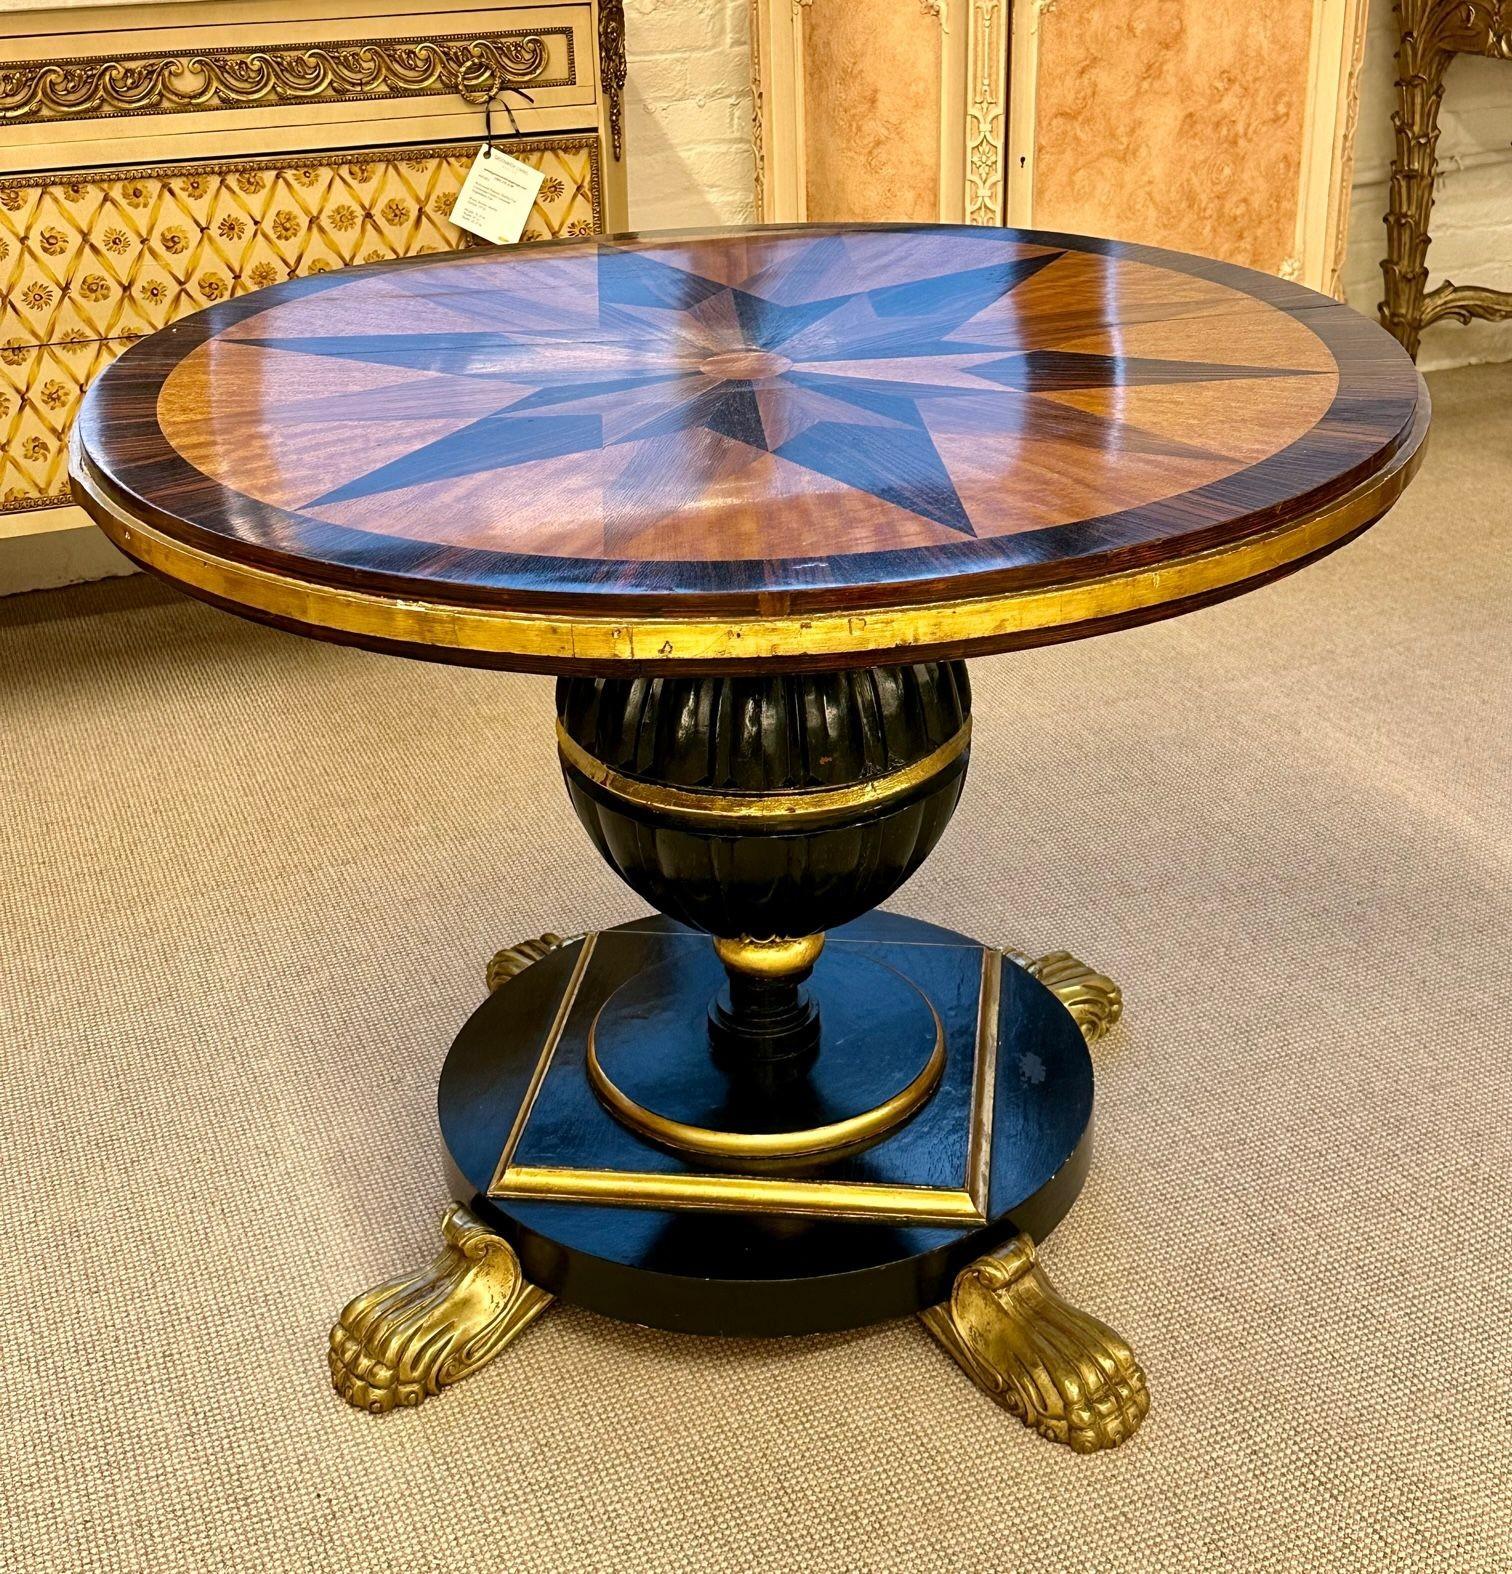 19th Century Italian Continental Centre Table, End or Card Table, Bronze Feet
Regal Mahogany and Macassar Ebony Circular Centre, Card or Hall Table with intricate starburst inlaid top, sitting on ebonized and gilded stand, raised on solid gilt